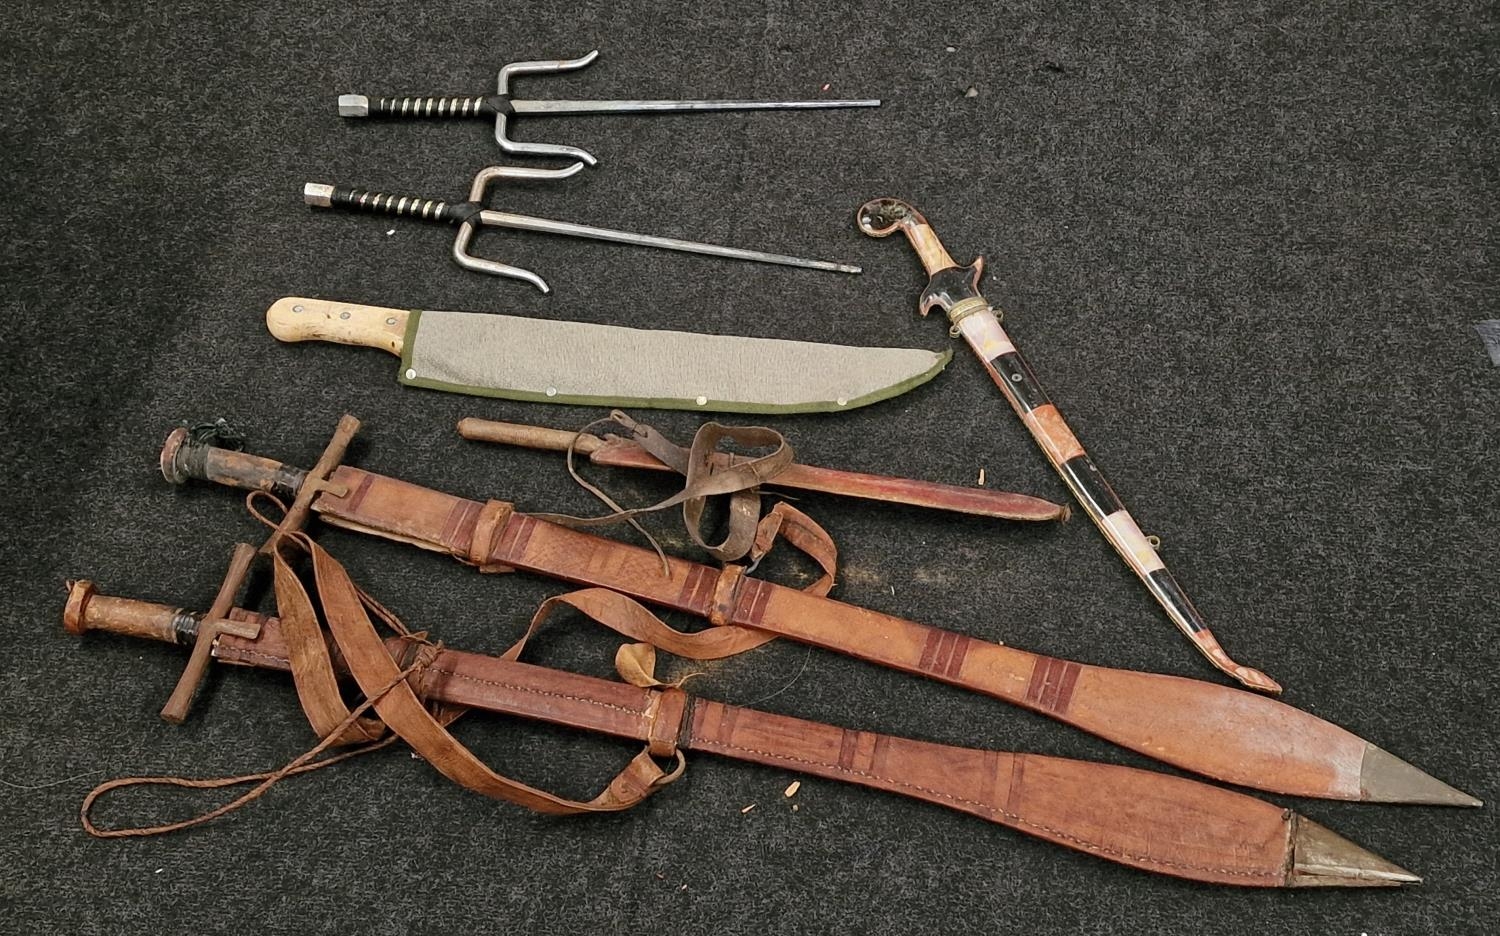 Collection of reproduction swords etc together with martial arts equipment.